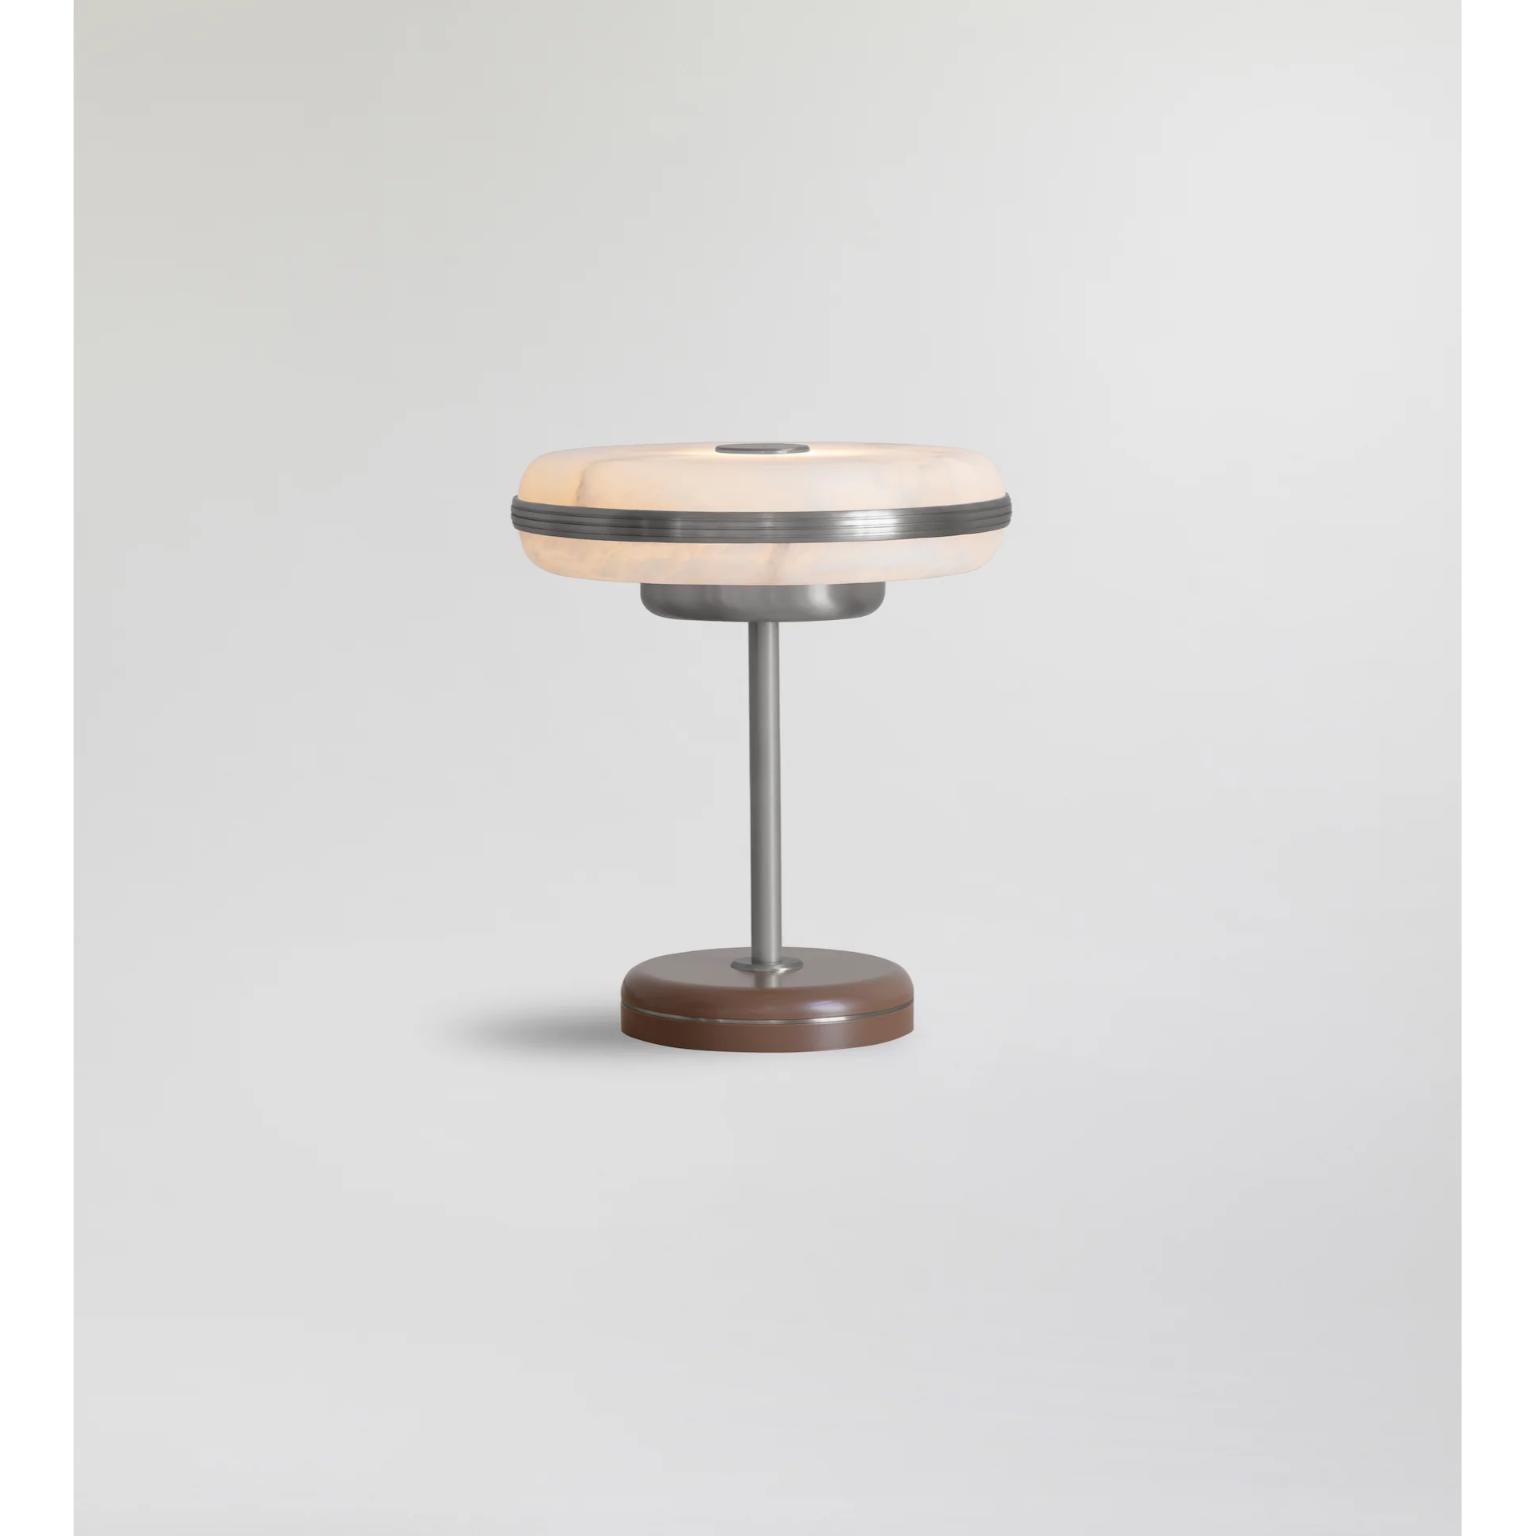 Beran Satin Nickel Small Table Lamp by Bert Frank
Dimensions: Ø 26 x H 28 cm.
Materials: Satin nickel and alabaster.
Base finish: Hazel.

Available in two different sizes. Available in different finishes and materials. Please contact us. 

The